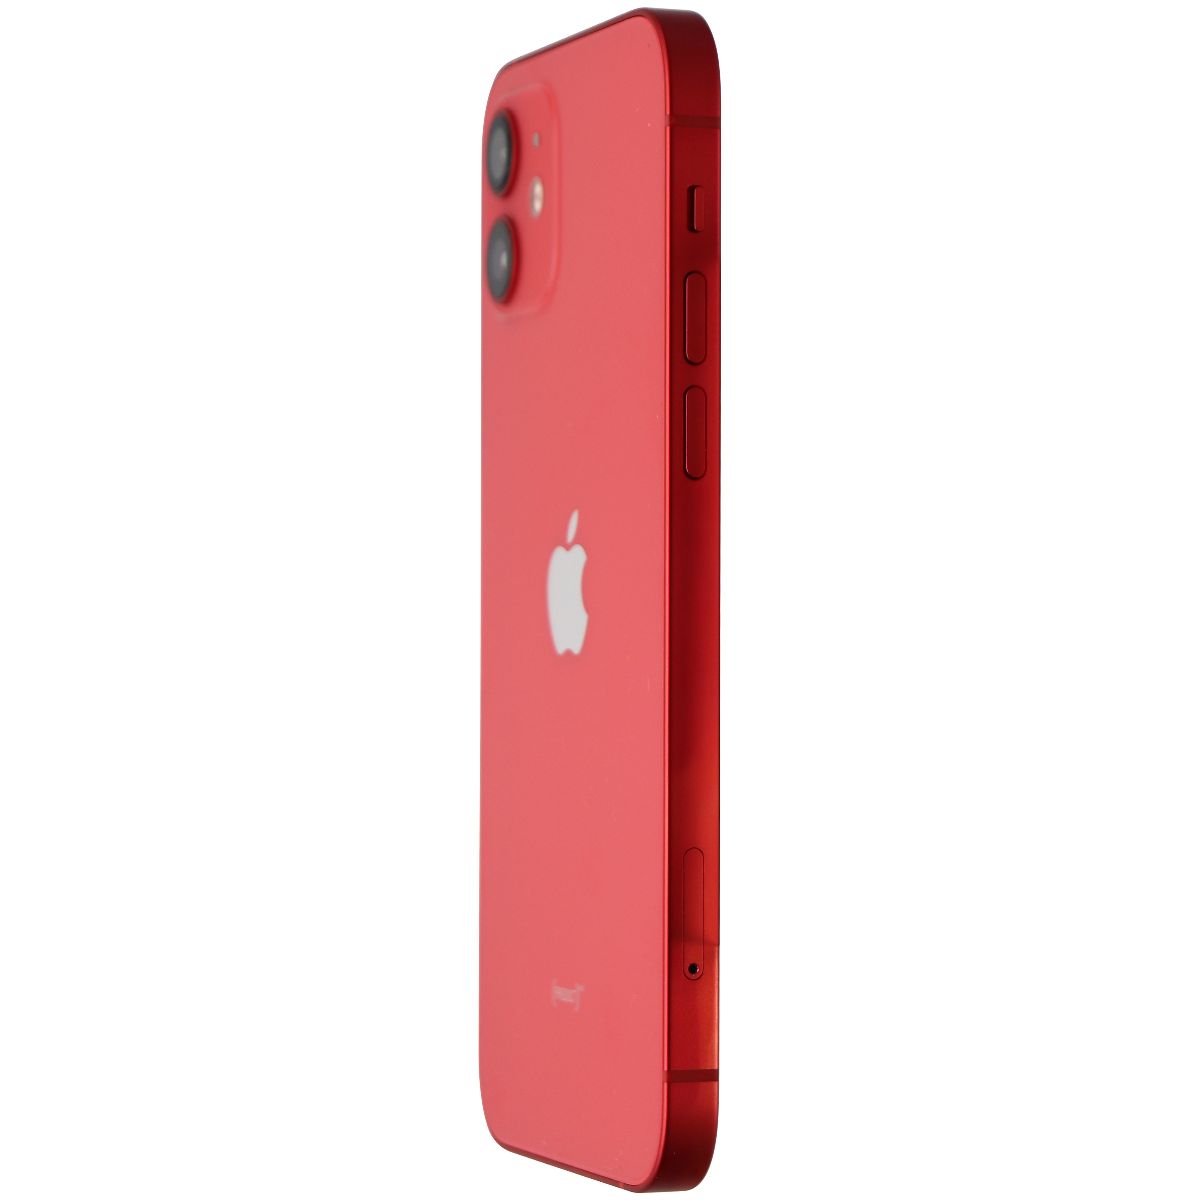 Apple iPhone 12 (6.1-inch) Smartphone (A2172) Unlocked - 128GB / Red Cell Phones & Smartphones Apple    - Simple Cell Bulk Wholesale Pricing - USA Seller